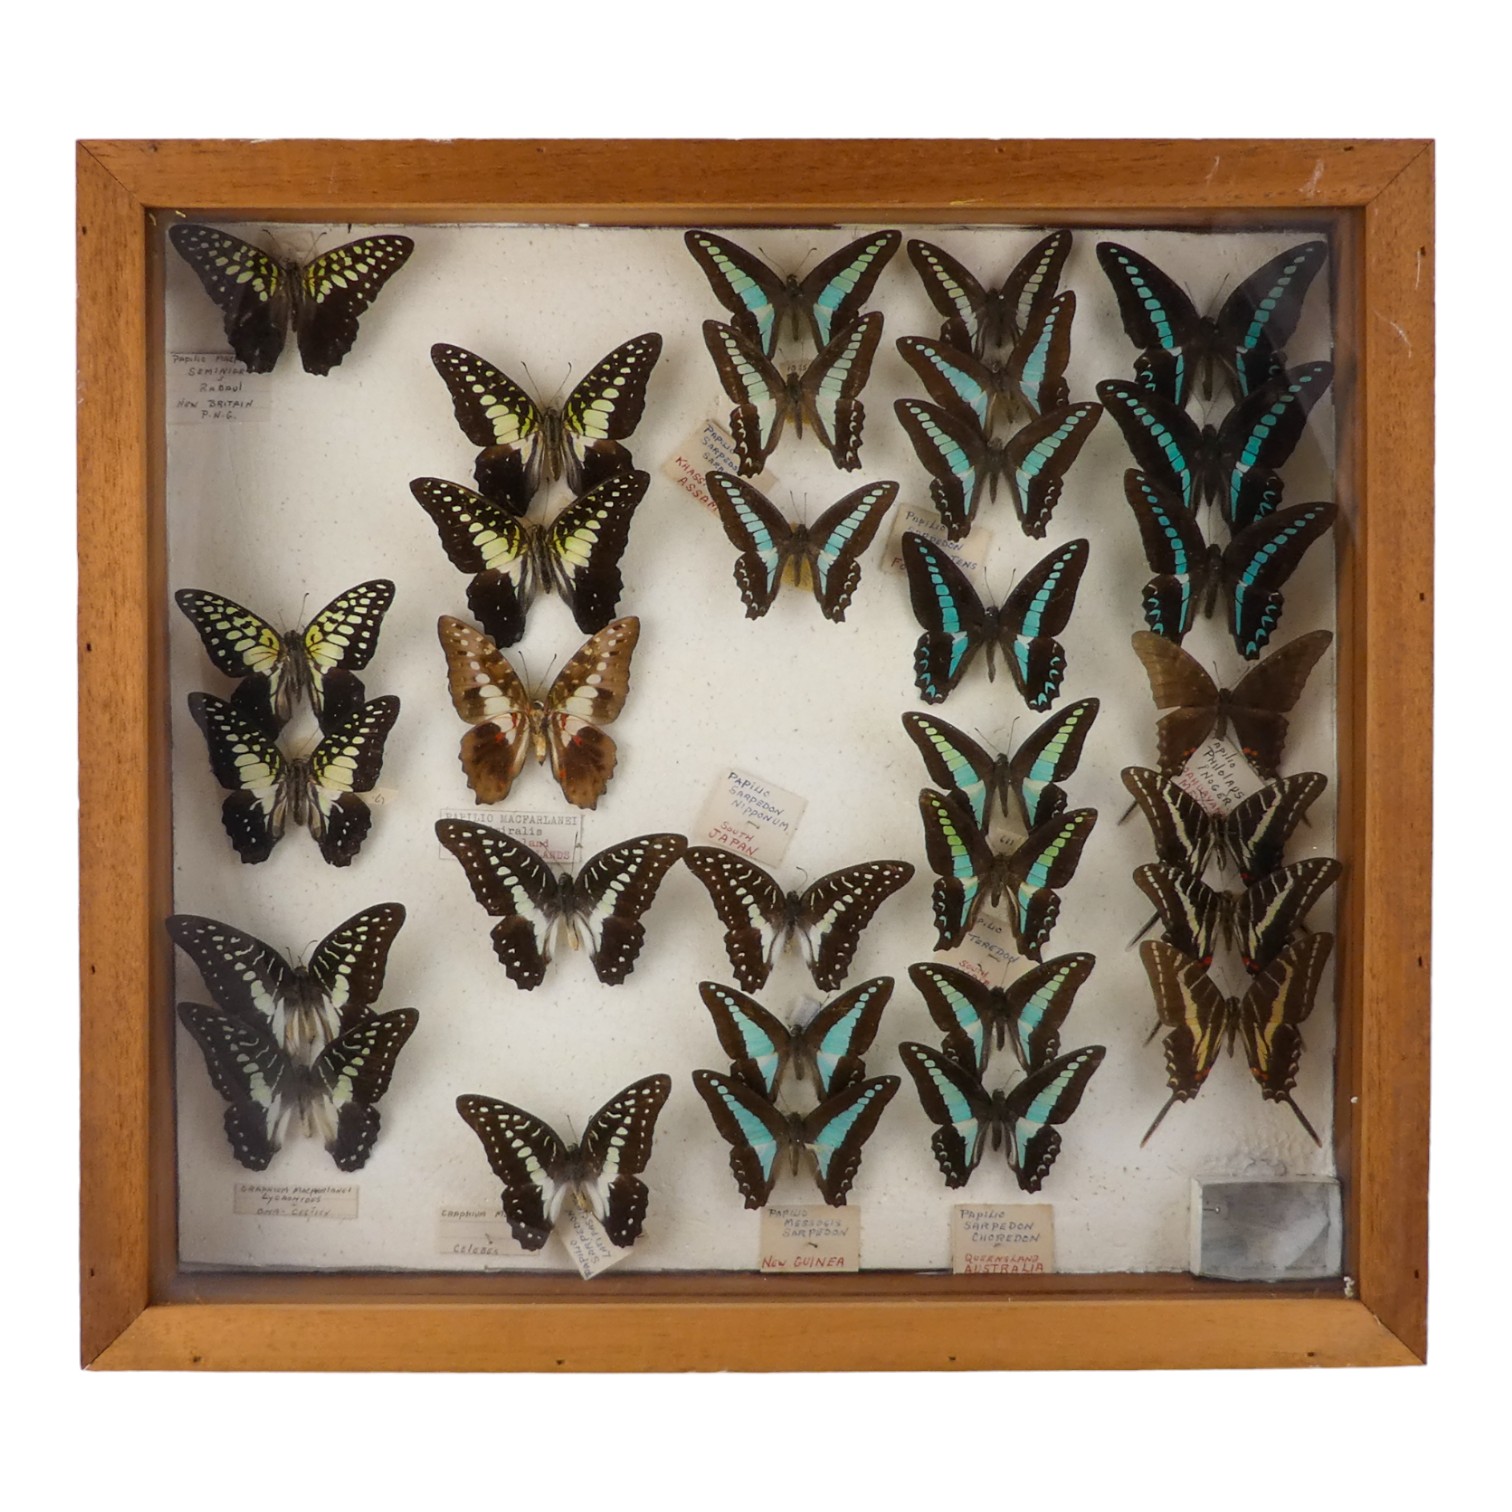 A case of butterflies in five rows - including Common Blue, Dark Kite Swallowtail and Common Jay